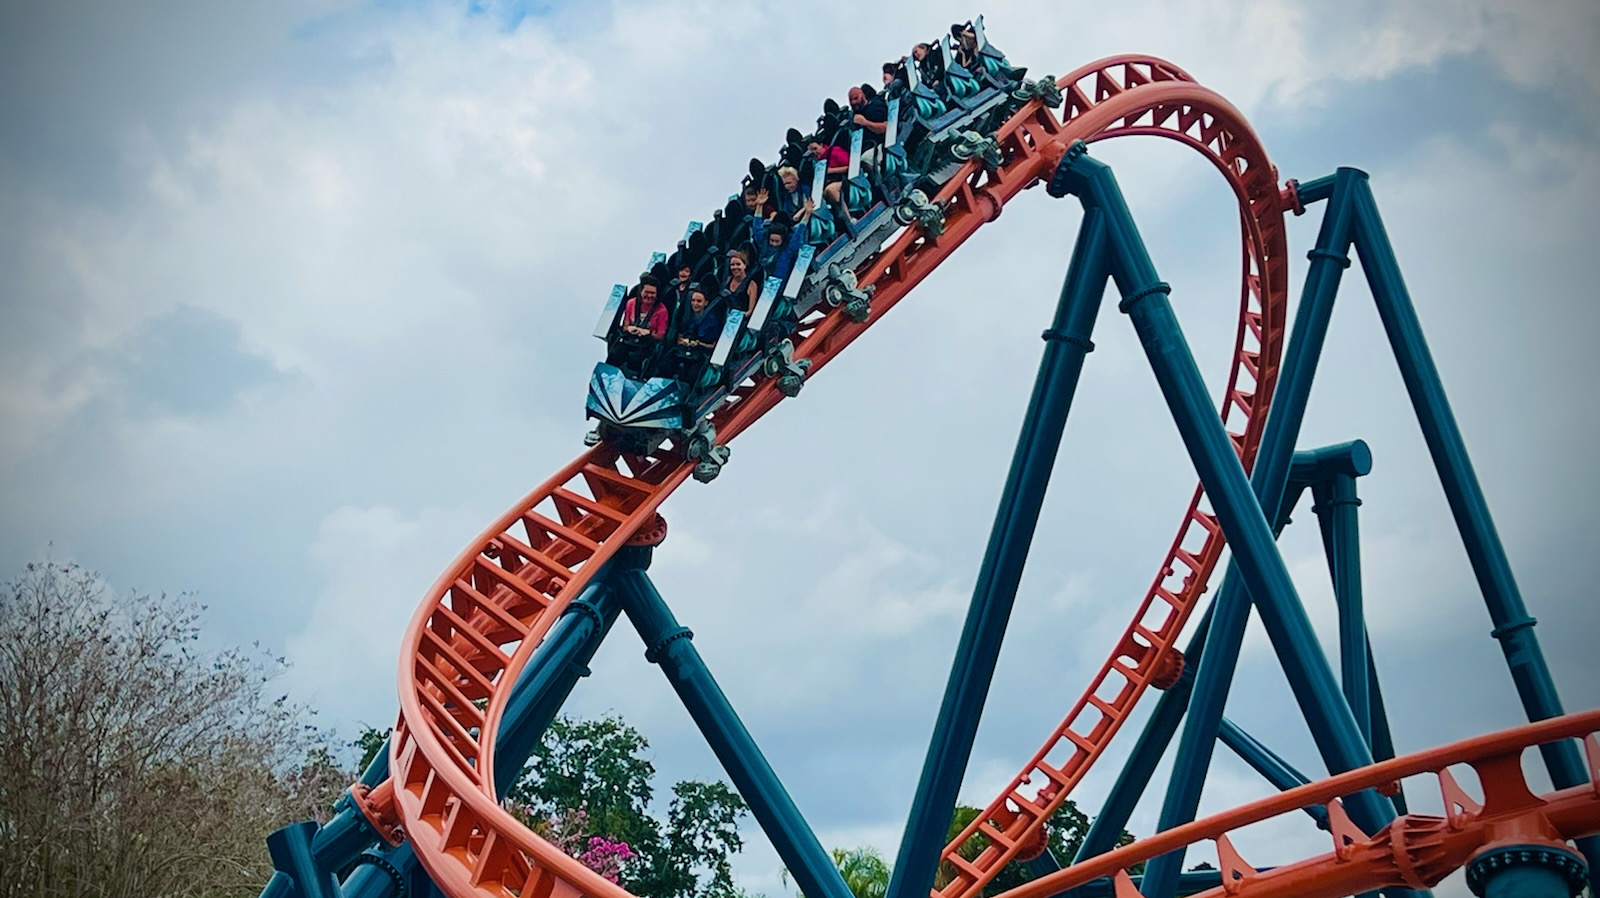 Regional theme parks bounce back from COVID closures, enjoy higher